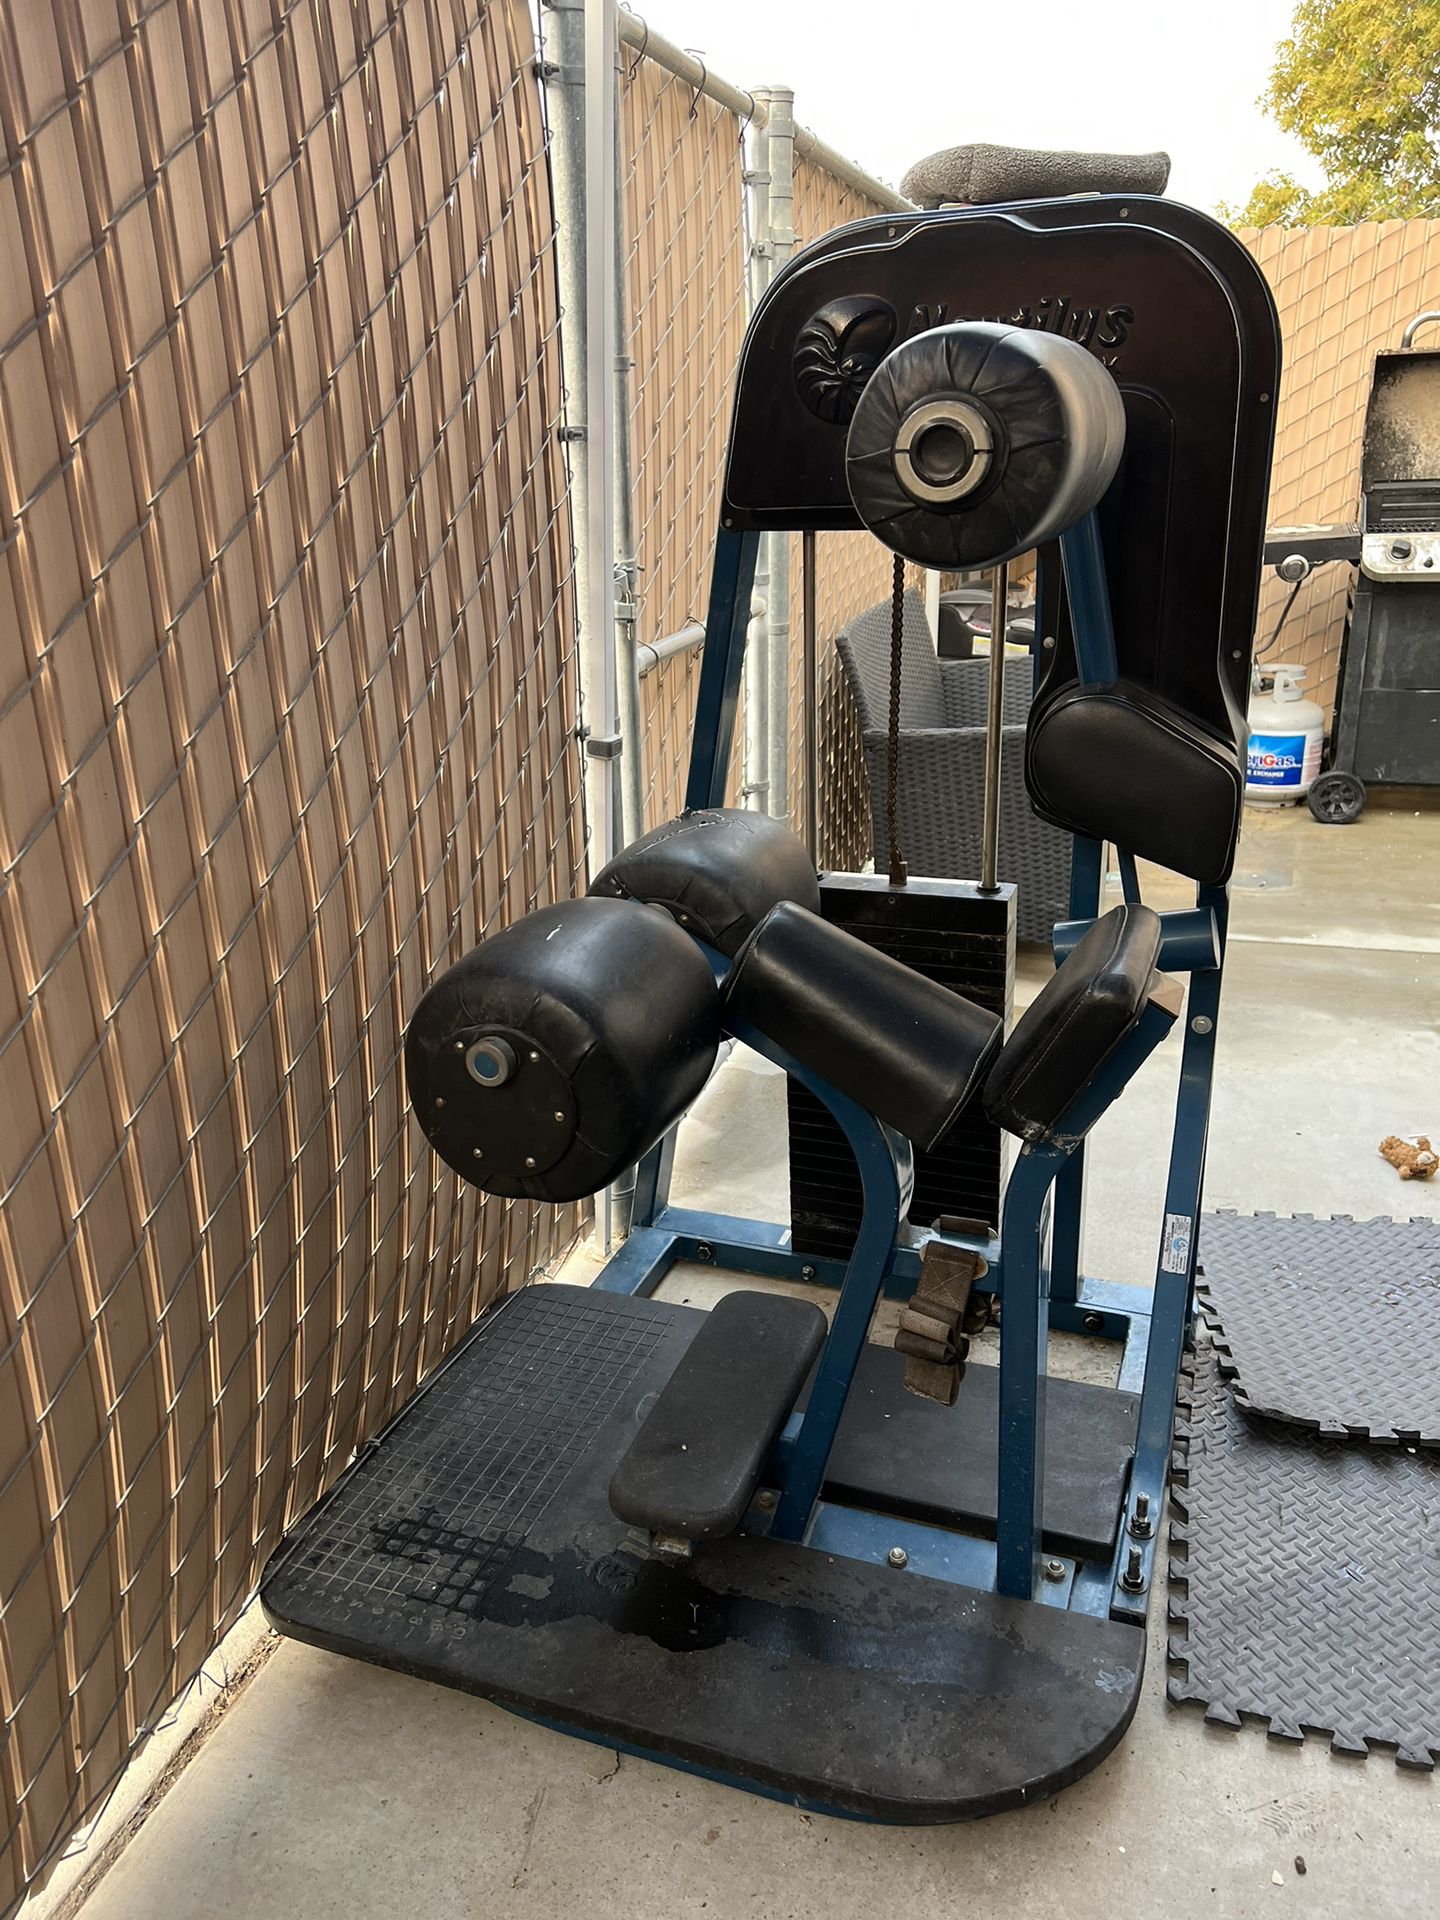 Nautilus Back Machine And Bench Press Rack With Weights